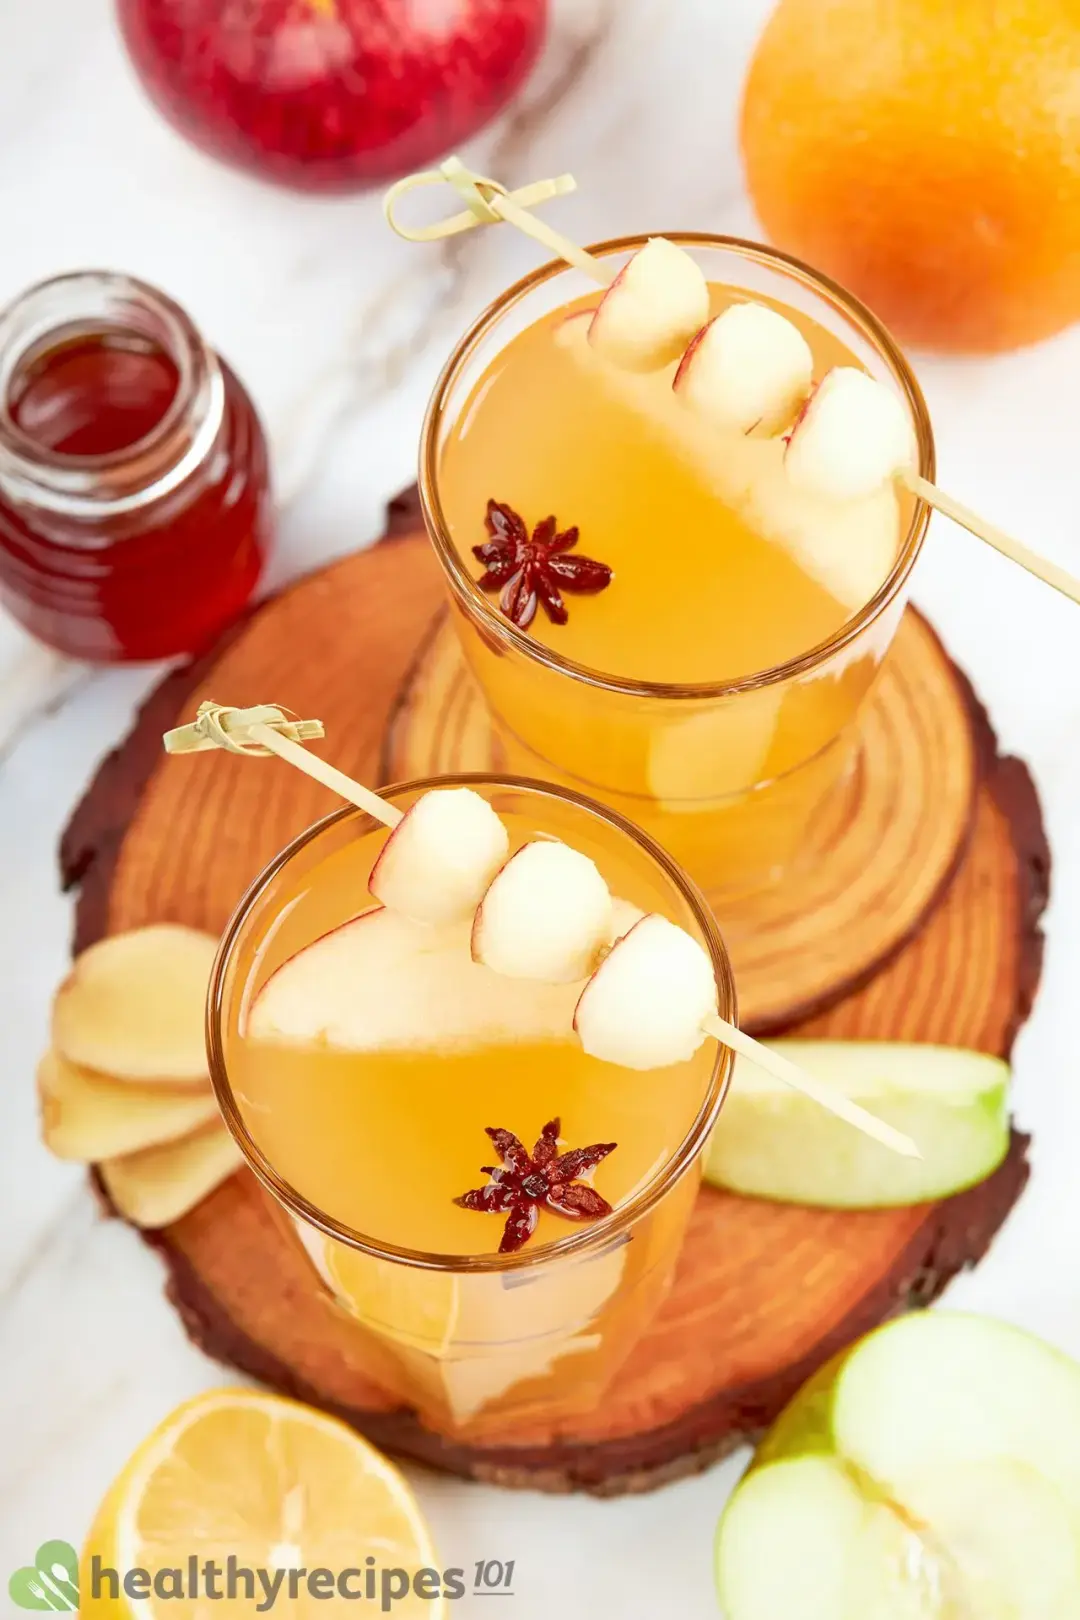 Two glasses of hot toddy cocktail garnished with apple wedges, apple skewers, star anise, and a jar of honey next to them